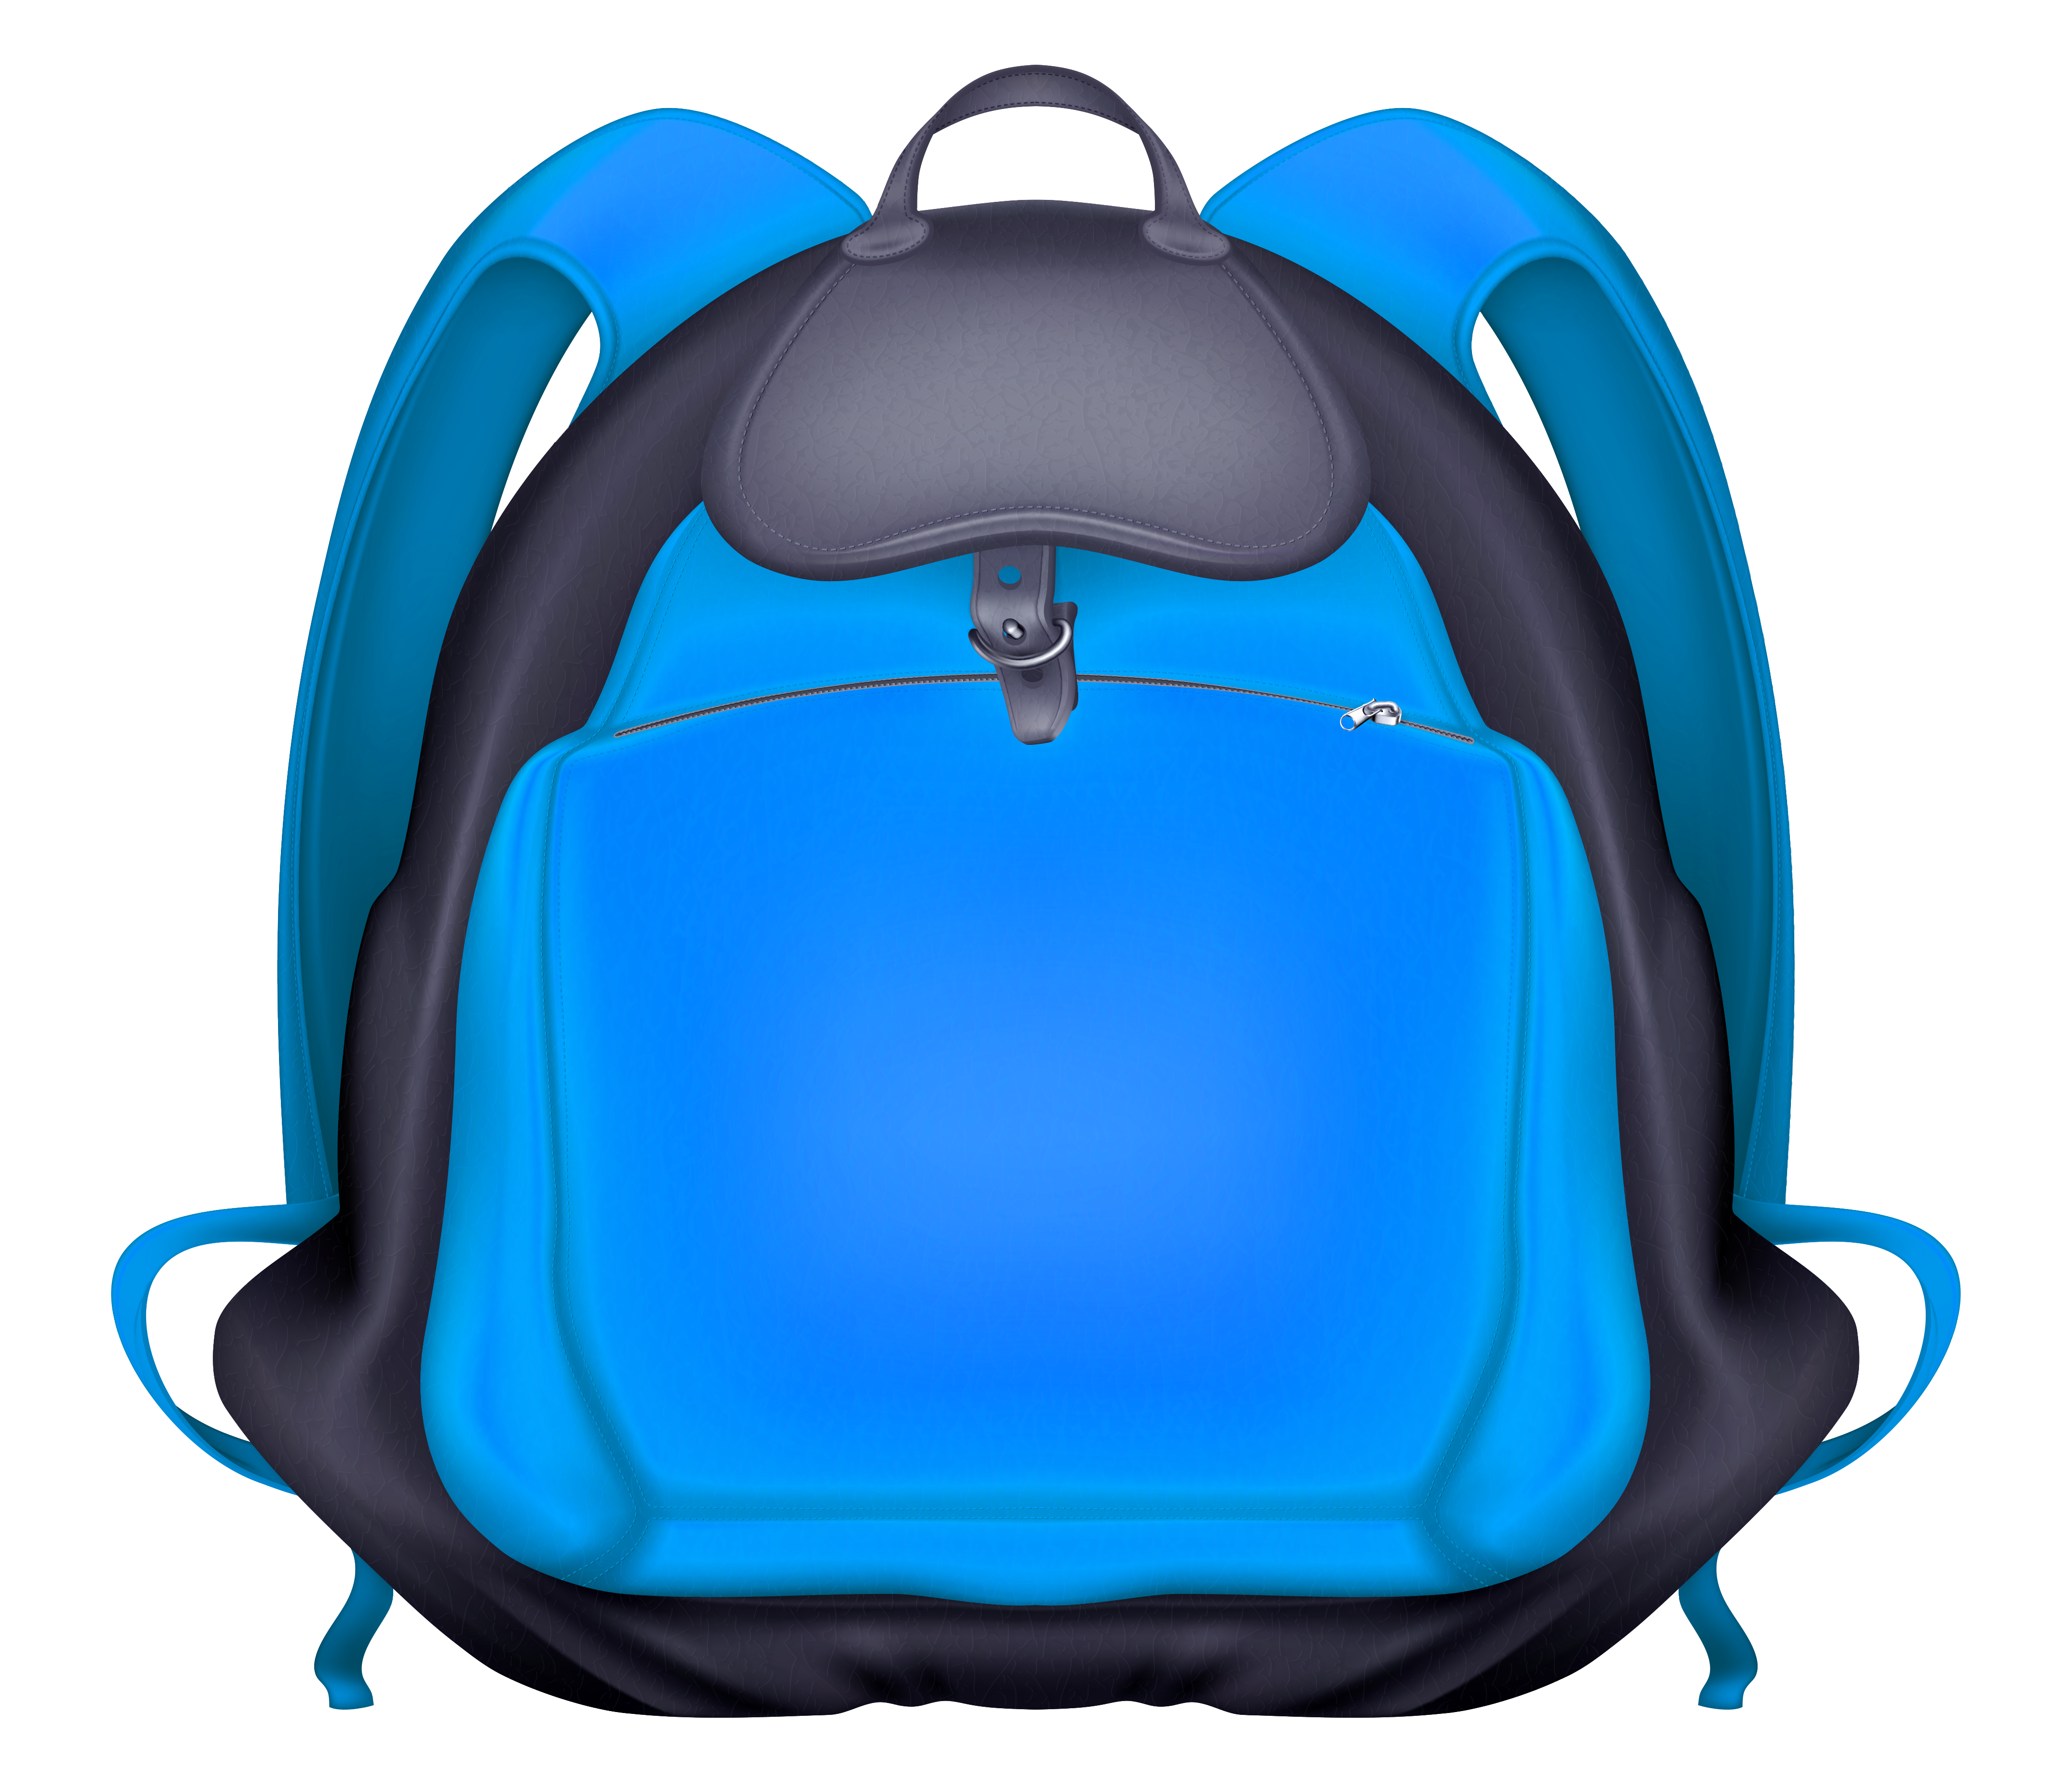 This School Backpack Images Transparent Image Clipart